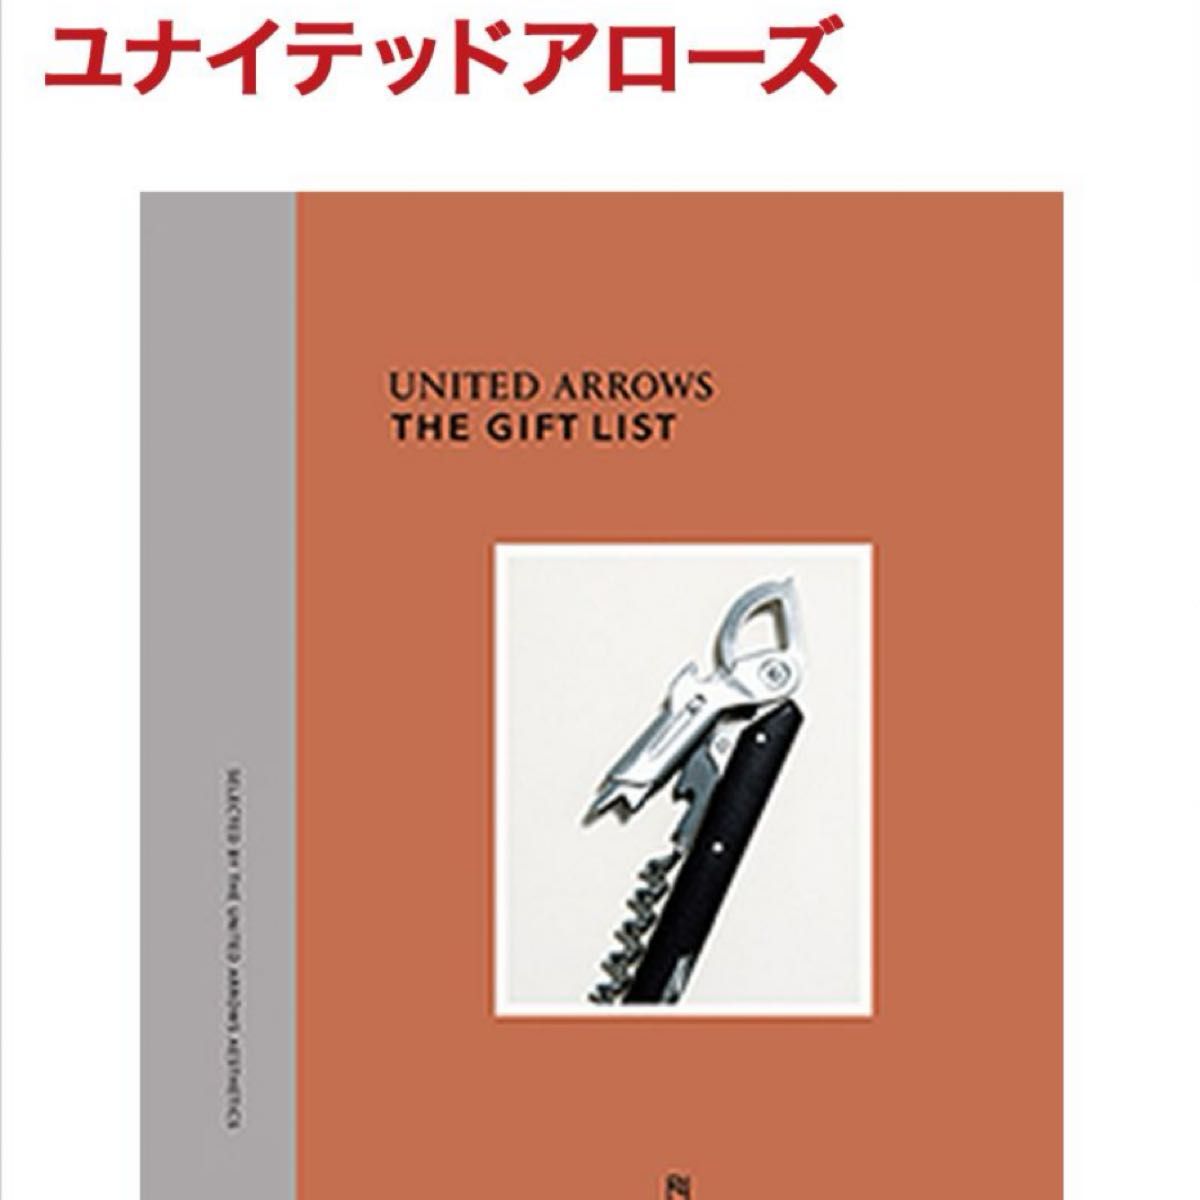 UNITED ARROWS カタログギフト